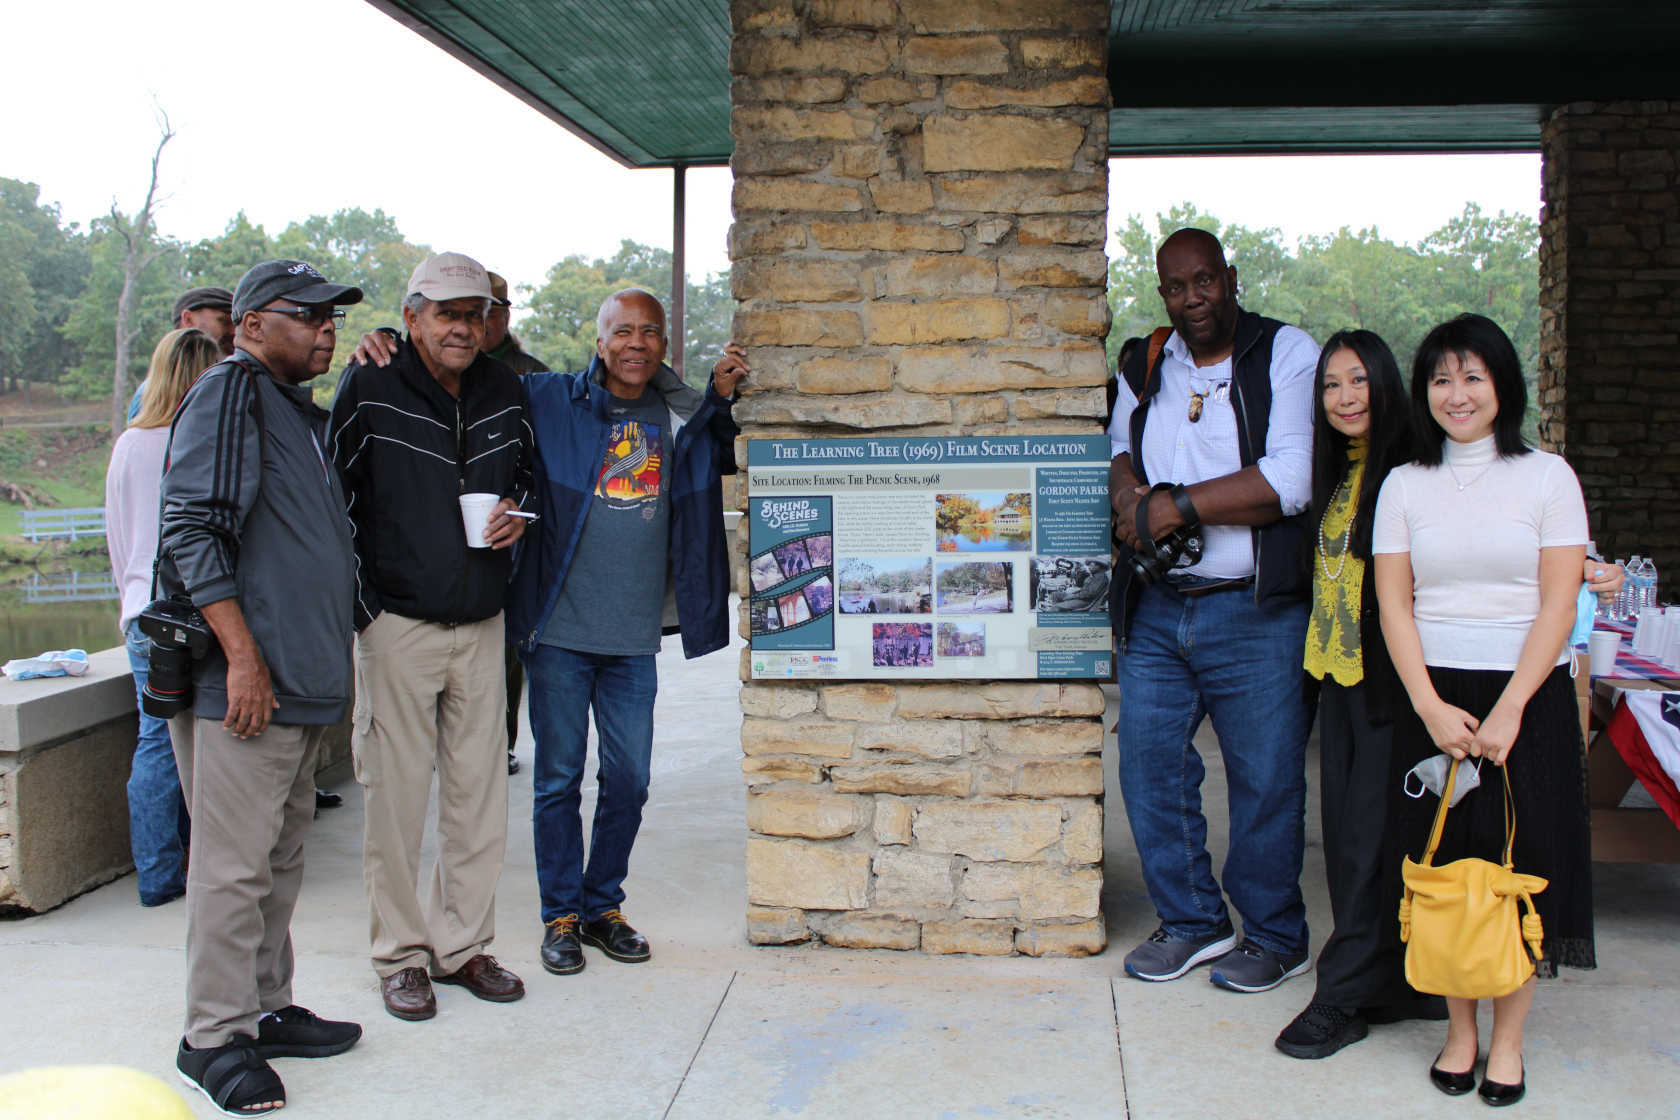 *The Learning Tree* Film Scene and Sign Trail was unveiled at a ribbon cutting ceremony during Fort Scott's annual Gordon Parks Celebration. In this image, special guests gather around an interpretive sign, from left to right: Duane 